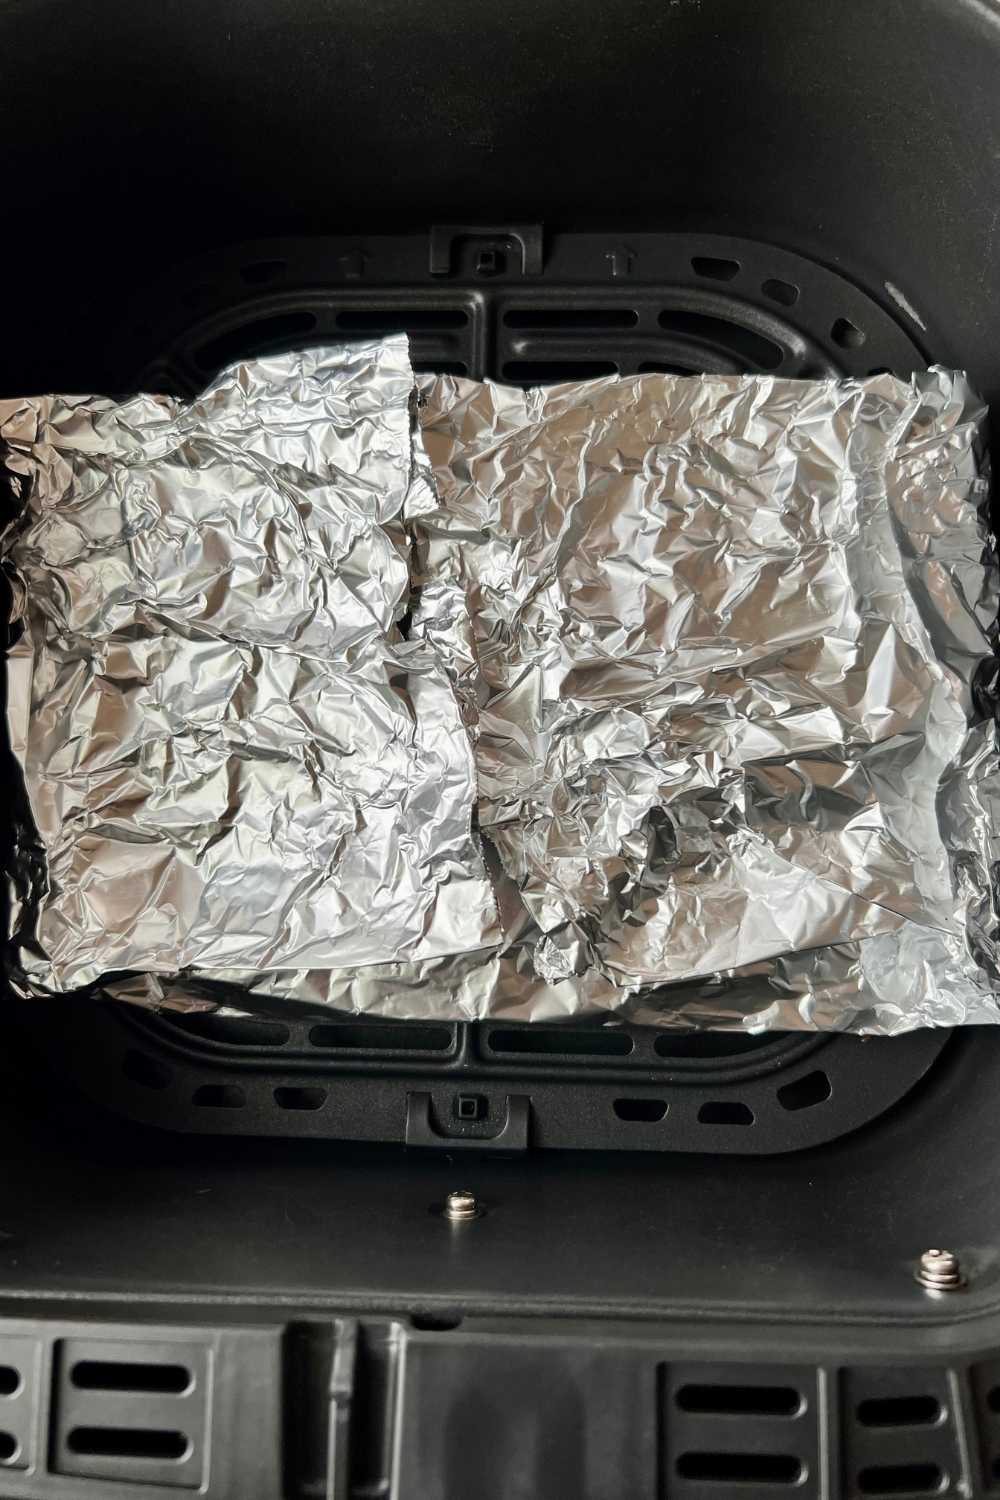 wrap fish and asparagus in foil